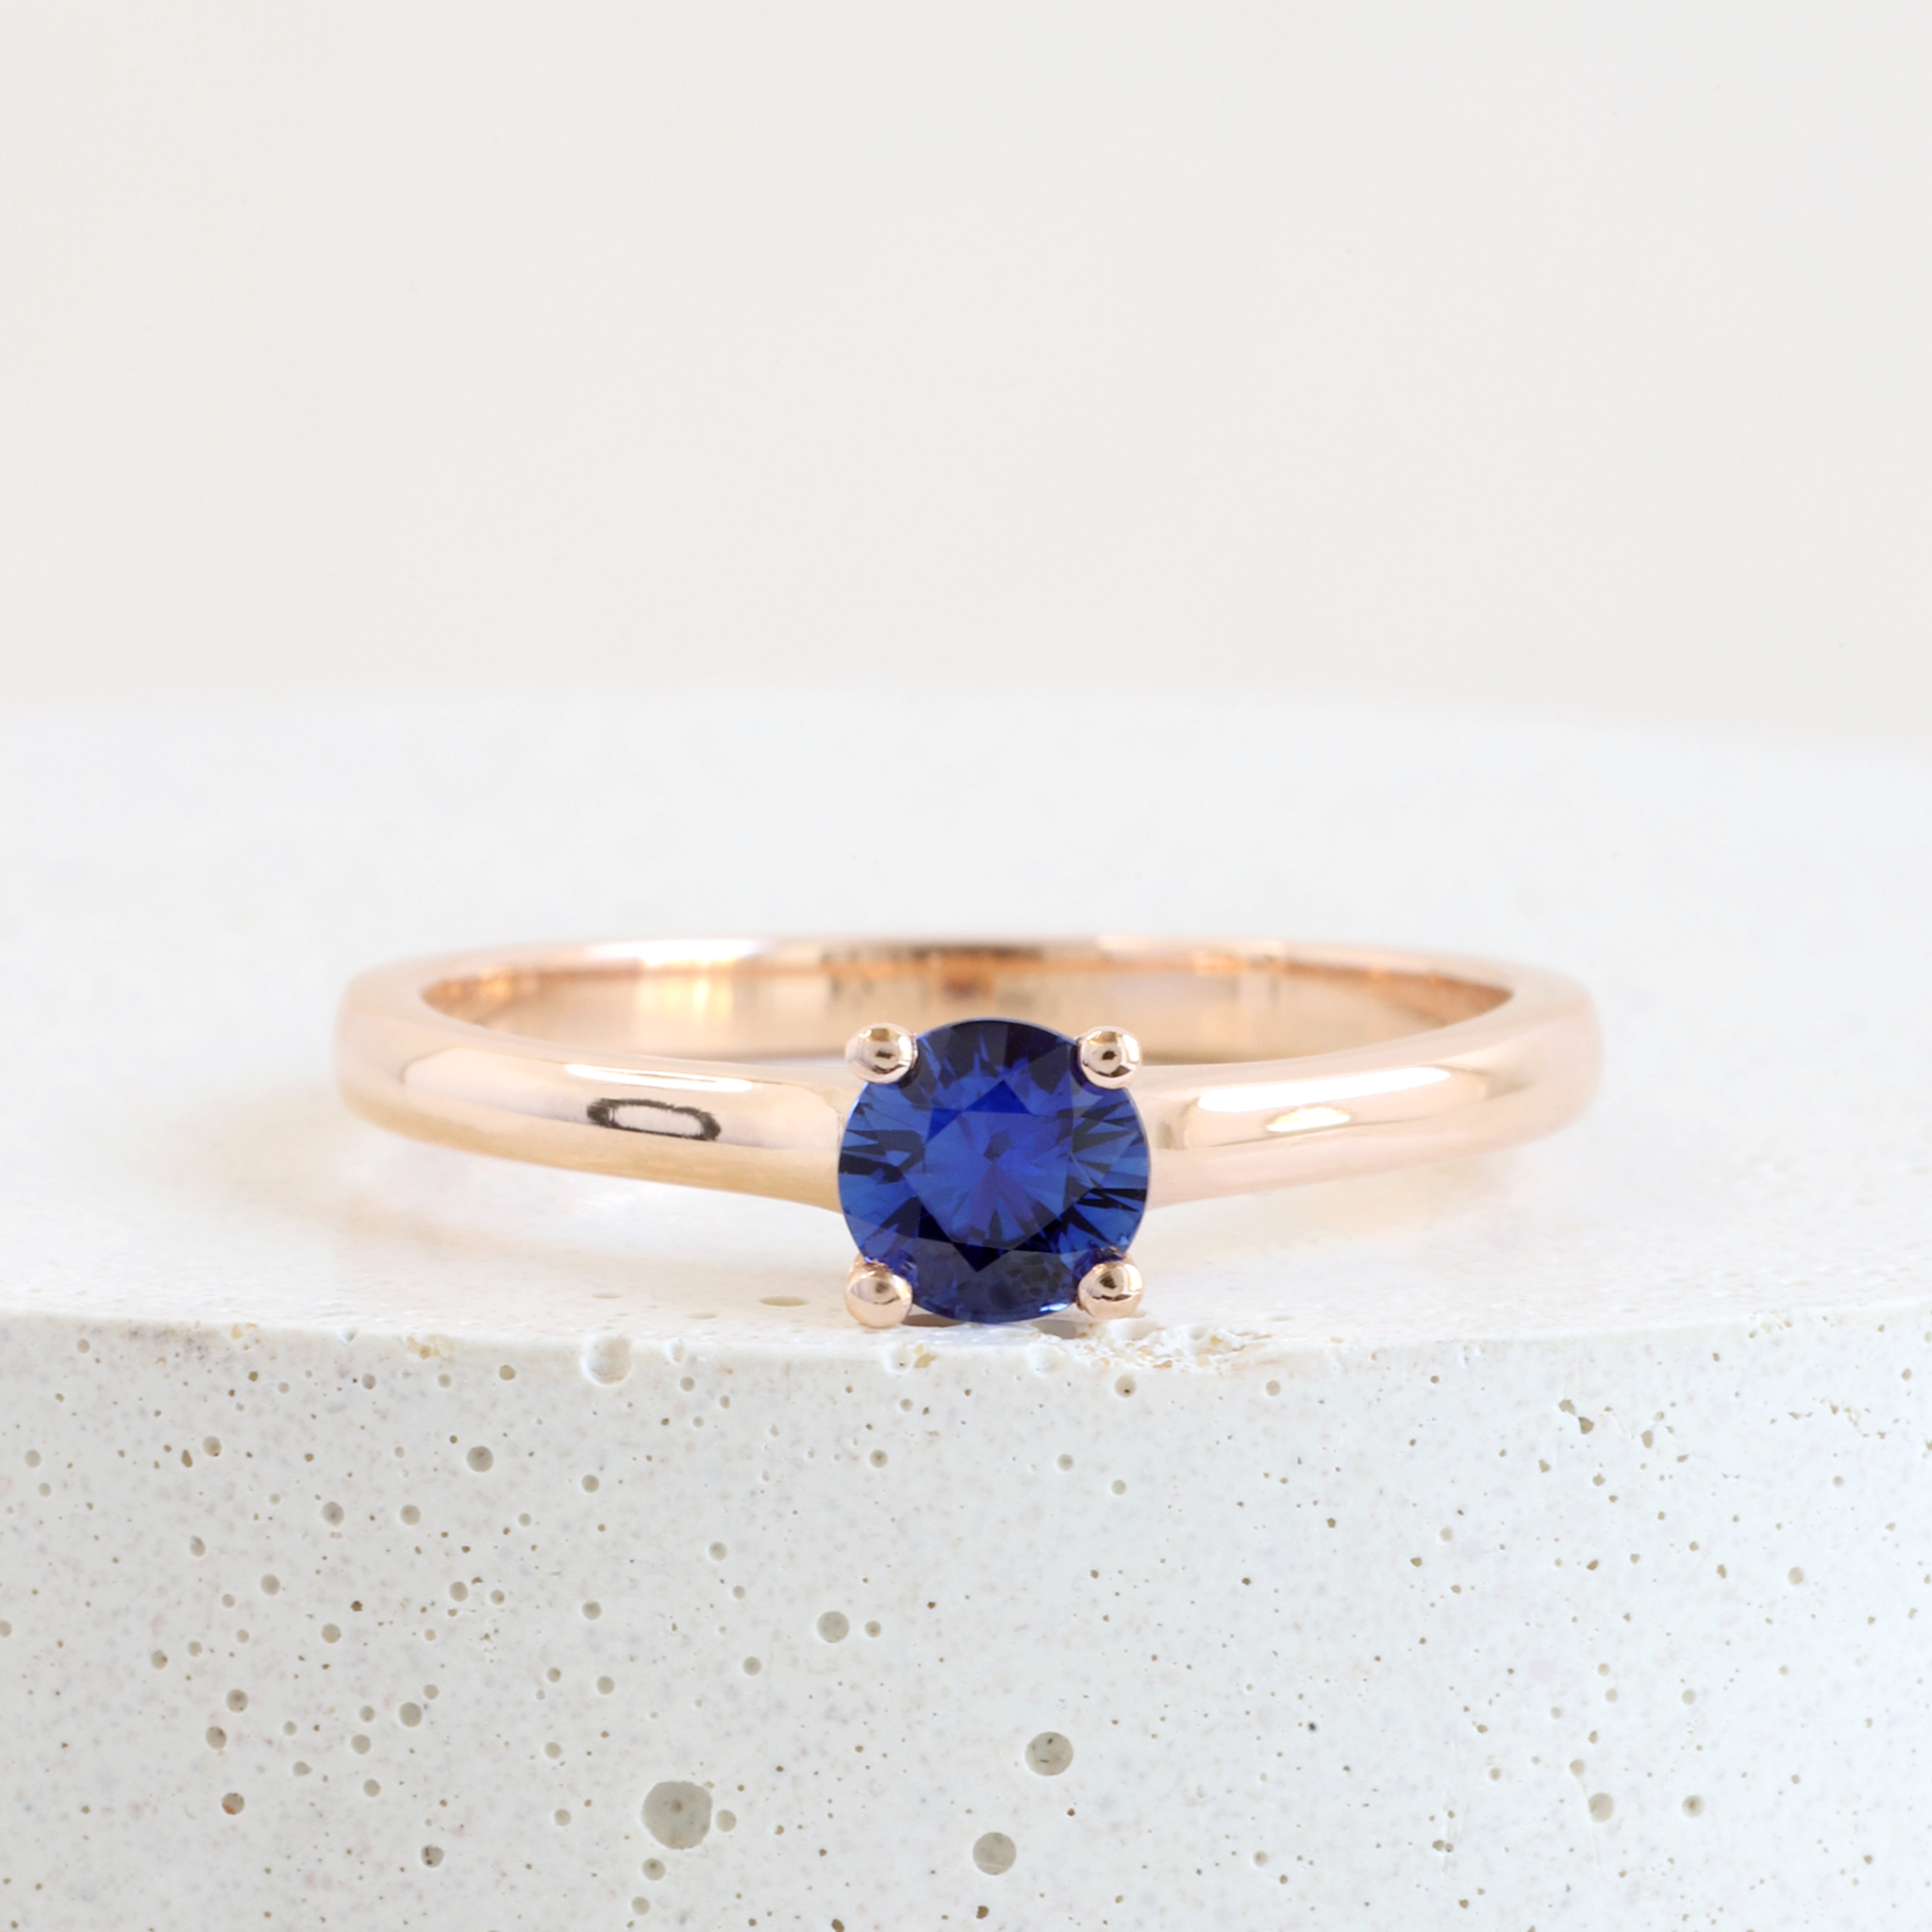 Ethical, Custom Ring-0.41 ct Deep Water Blue Sapphire Traditional